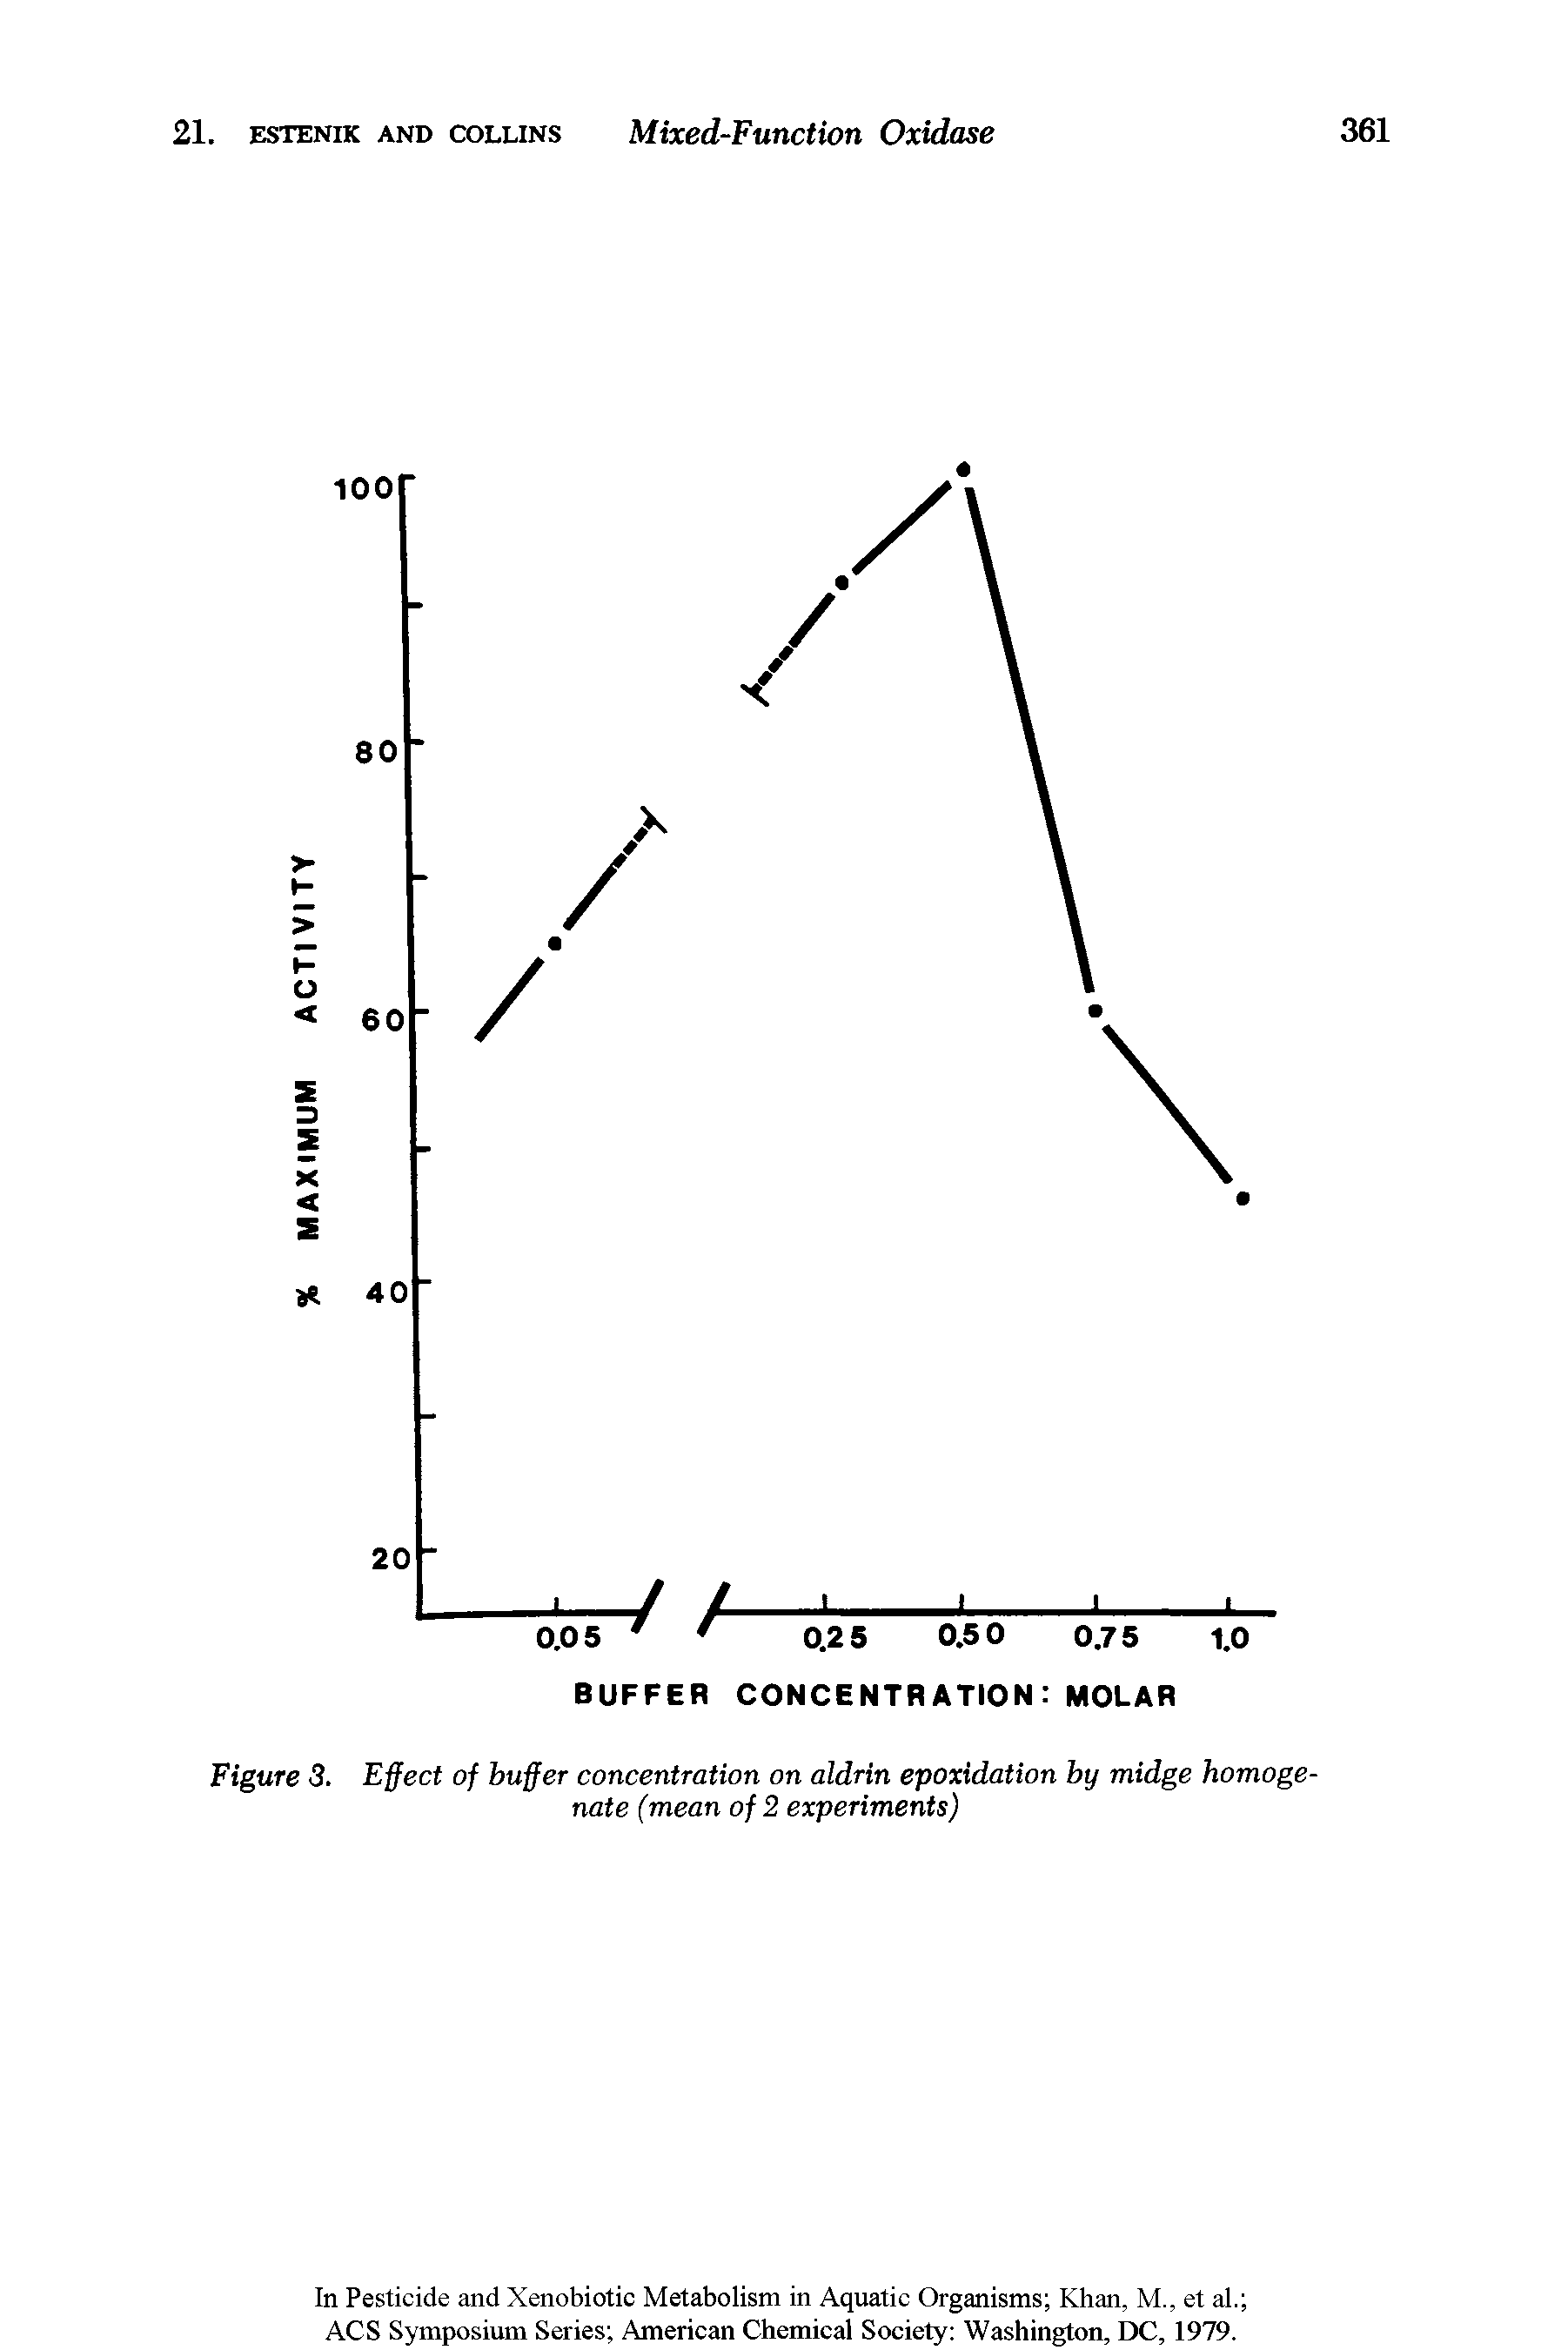 Figure 3. Effect of buffer concentration on aldrin epoxidation by midge homogenate (mean of 2 experiments)...